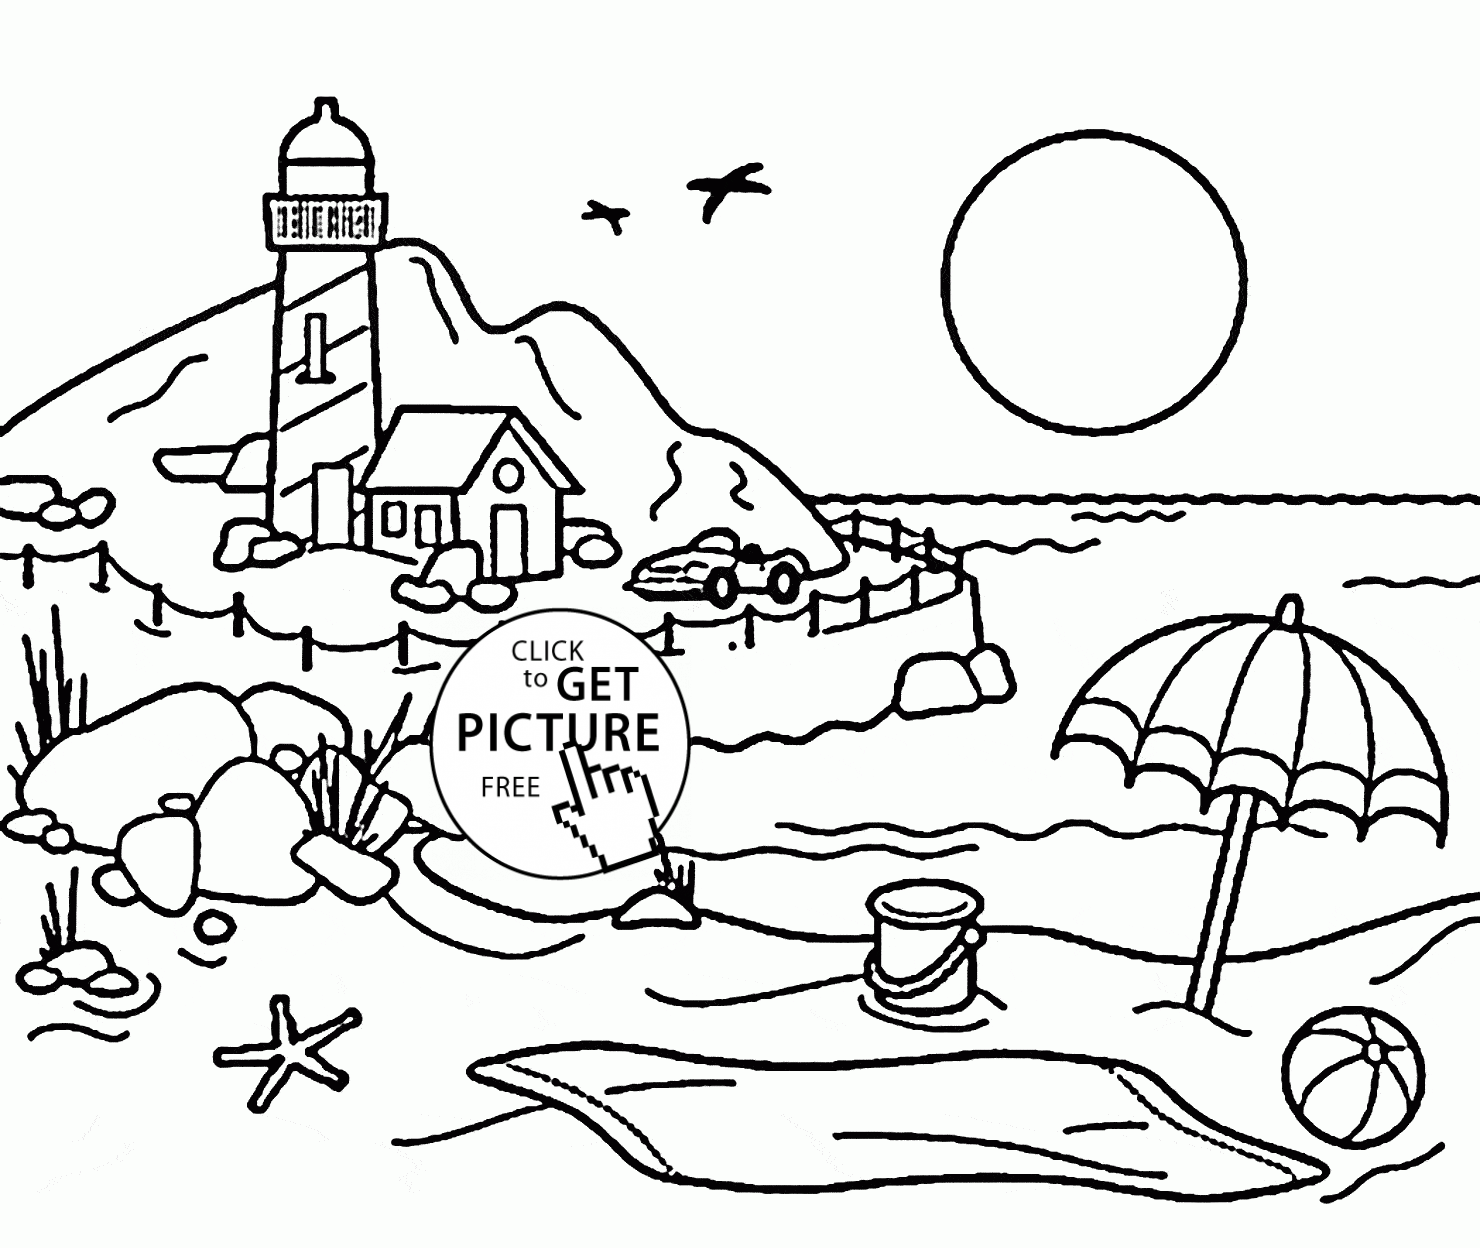 Lighthouse coloring page for kids, seasons coloring pages ...